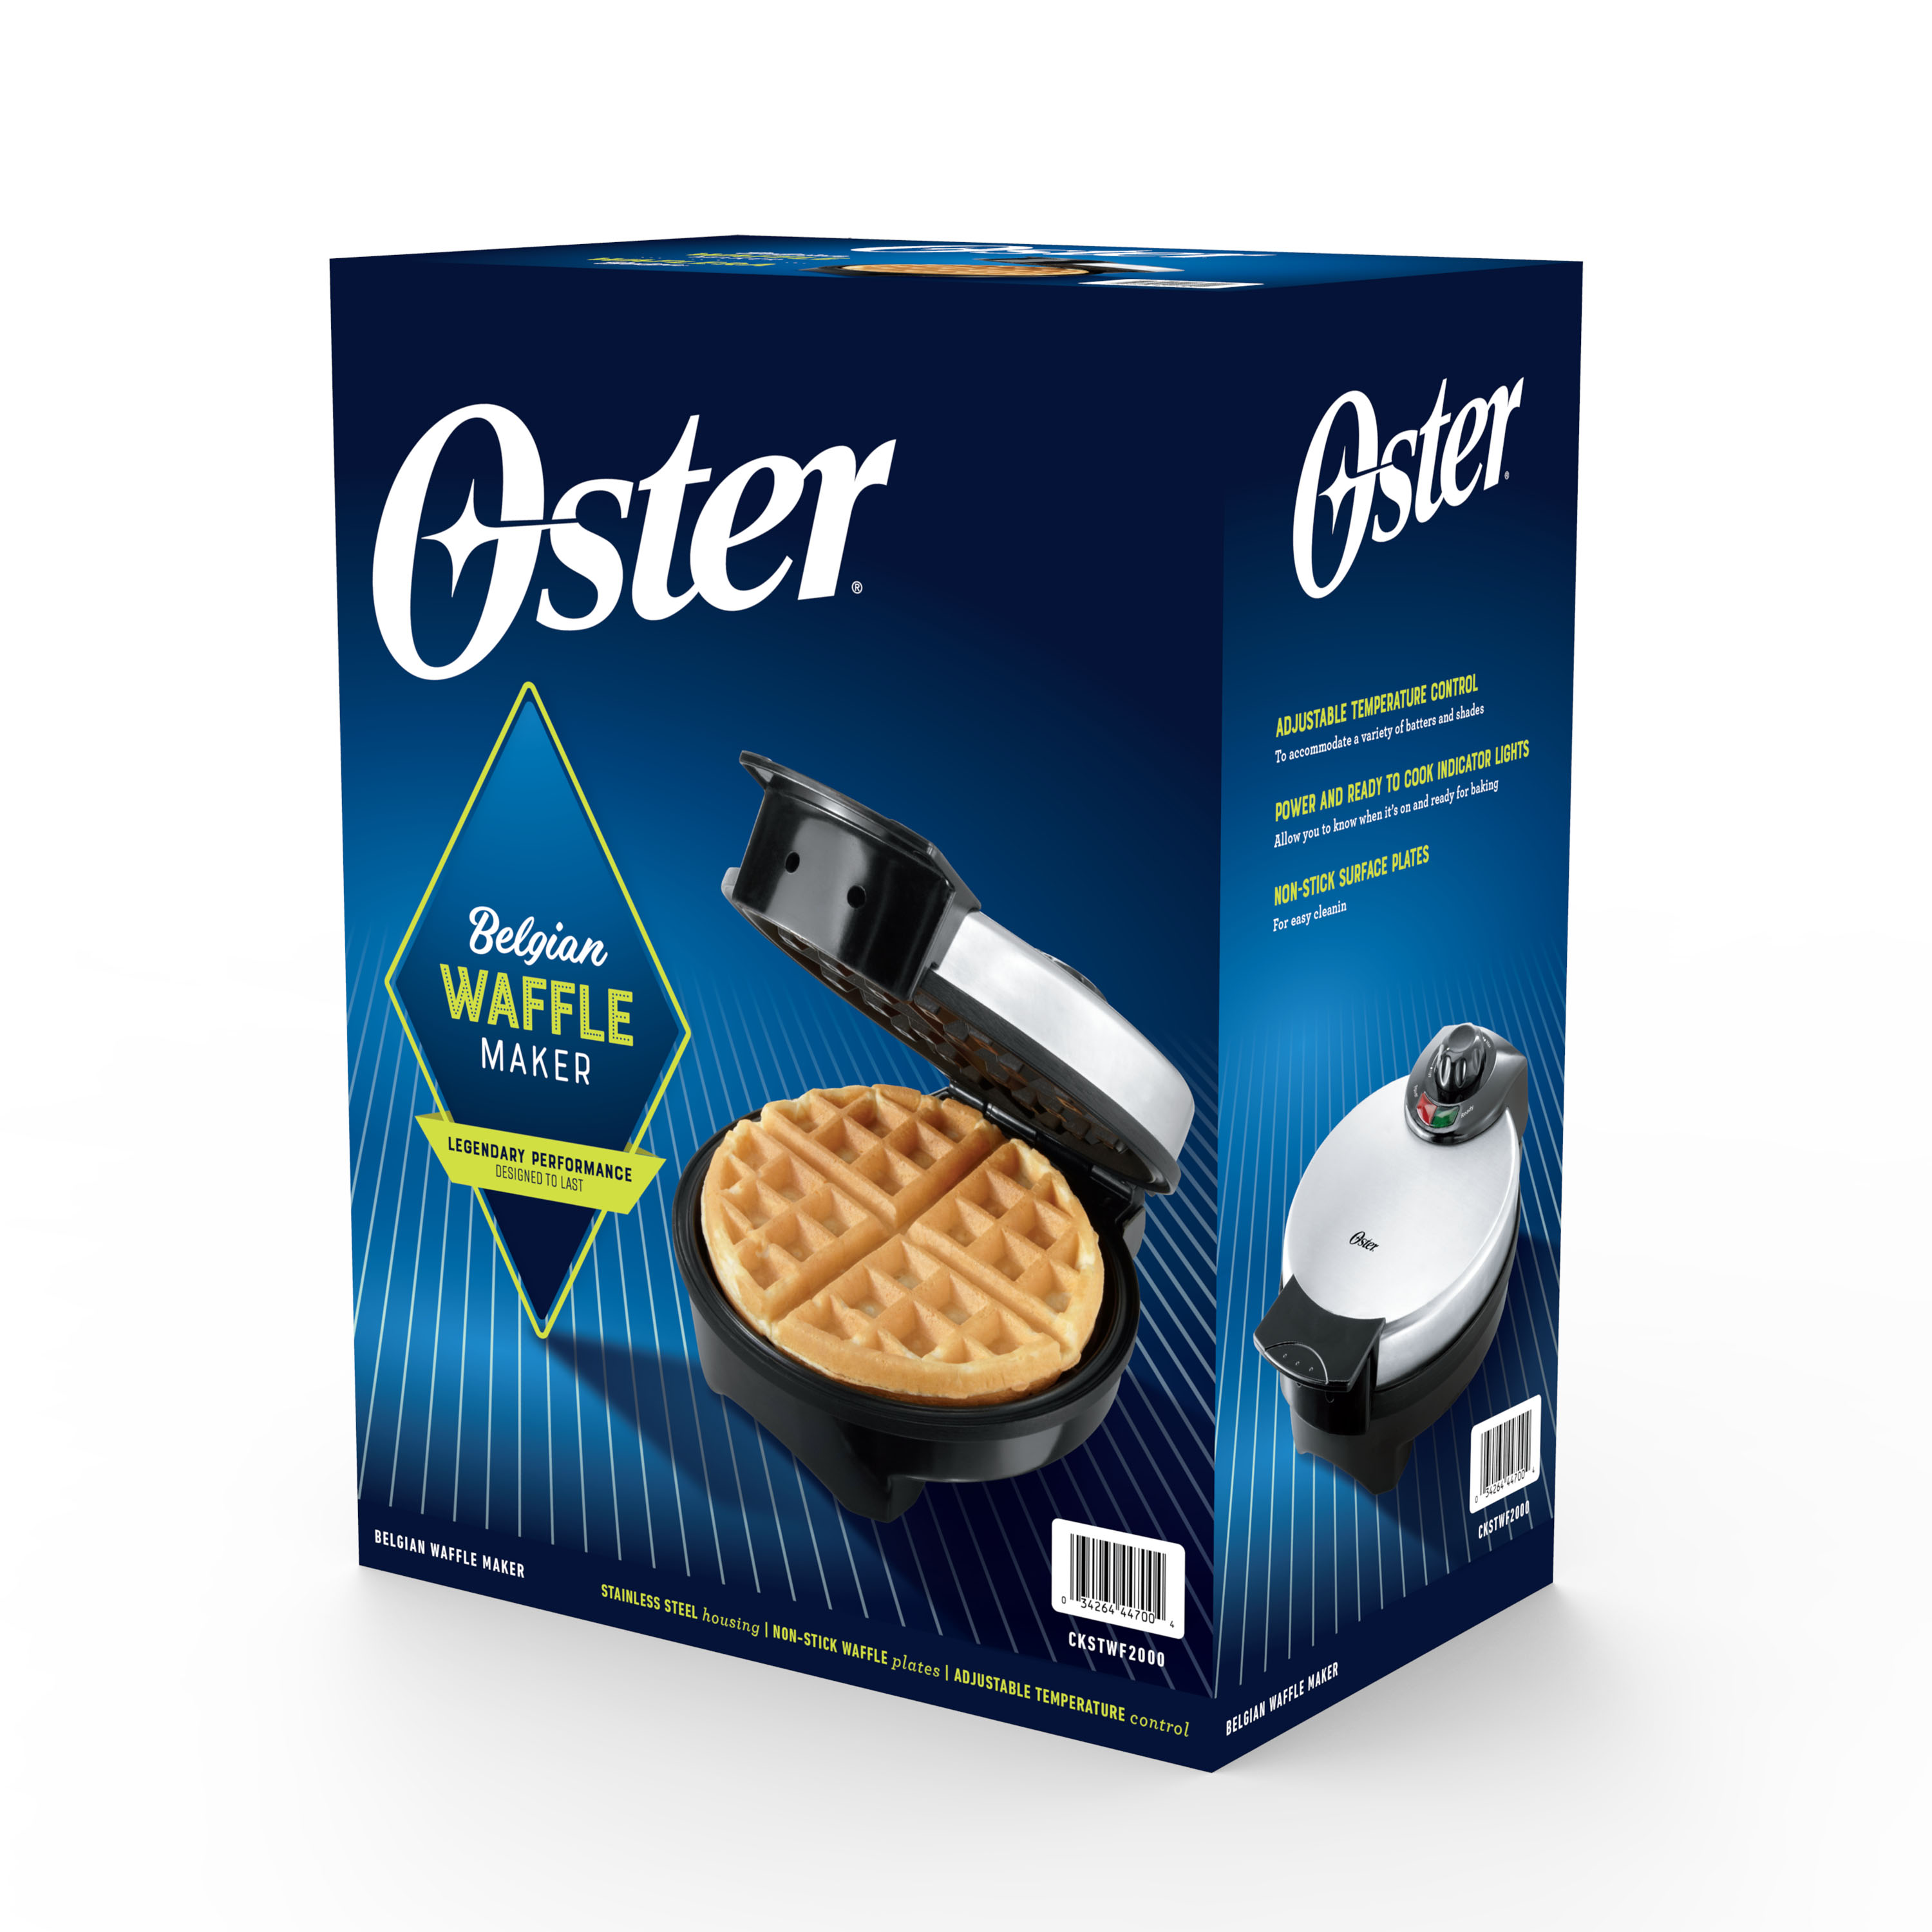 Oster 8" Nonstick Belgian Waffle Maker with Temperature Control, Silver - image 2 of 5